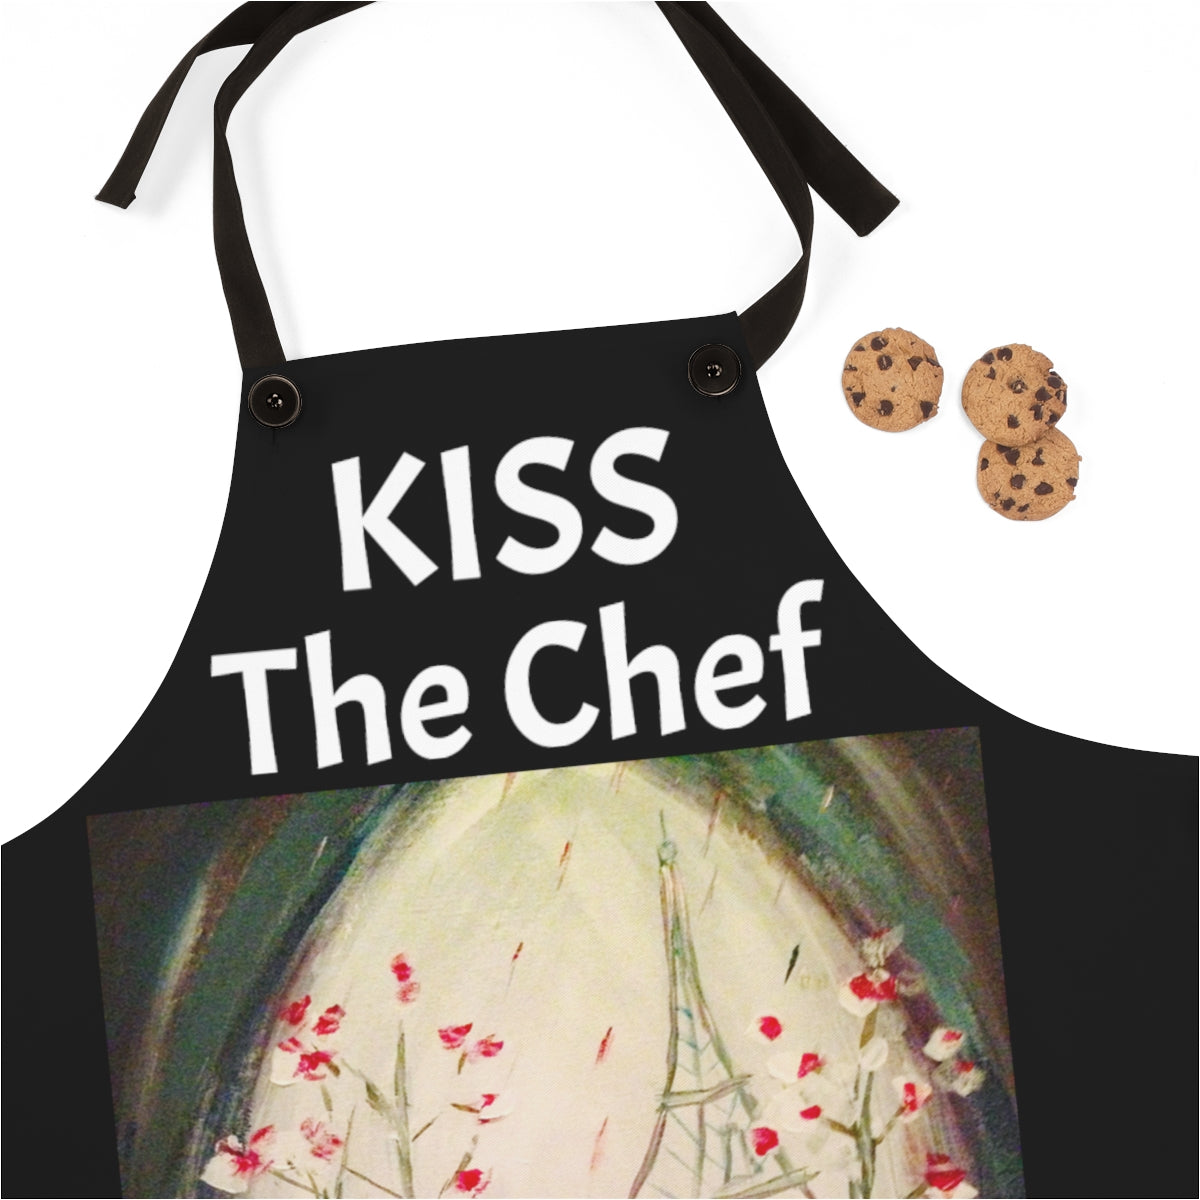 Kiss the Chef on a Black Kitchen Apron  with Original Paris Lovers Painting Art Print